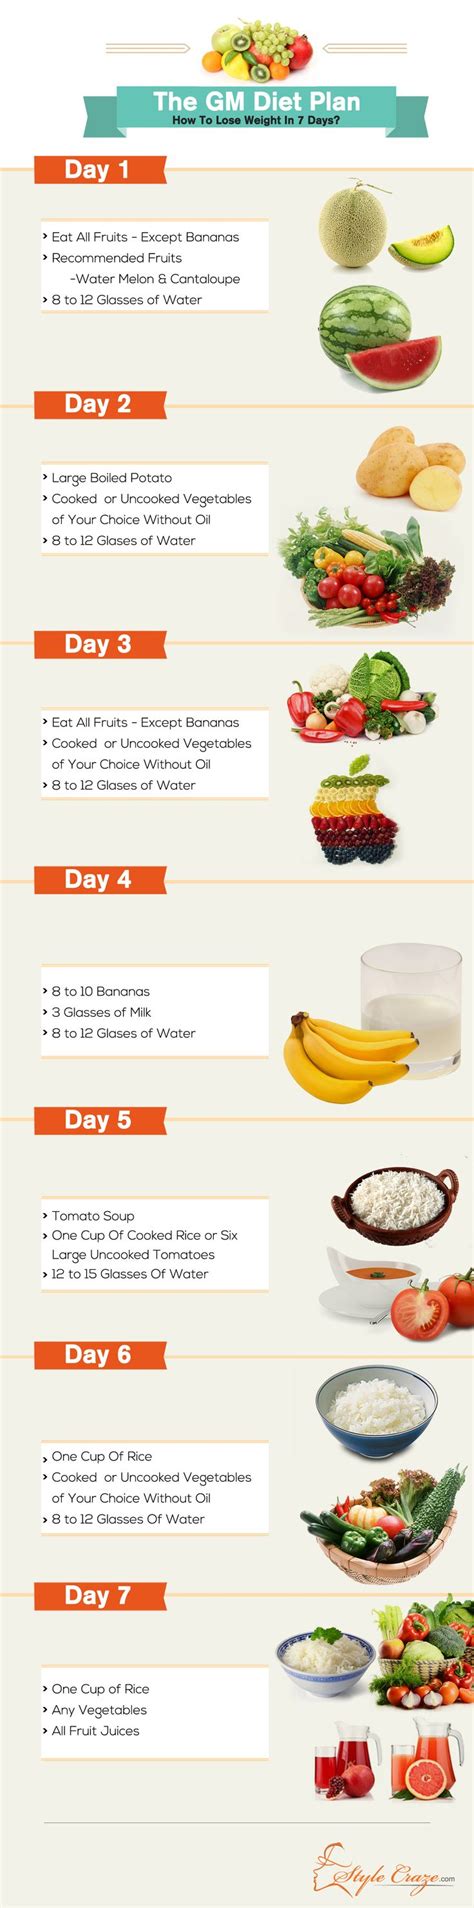 7 Diet Plan To Lose Weight Fast Rich Image And Wallpaper